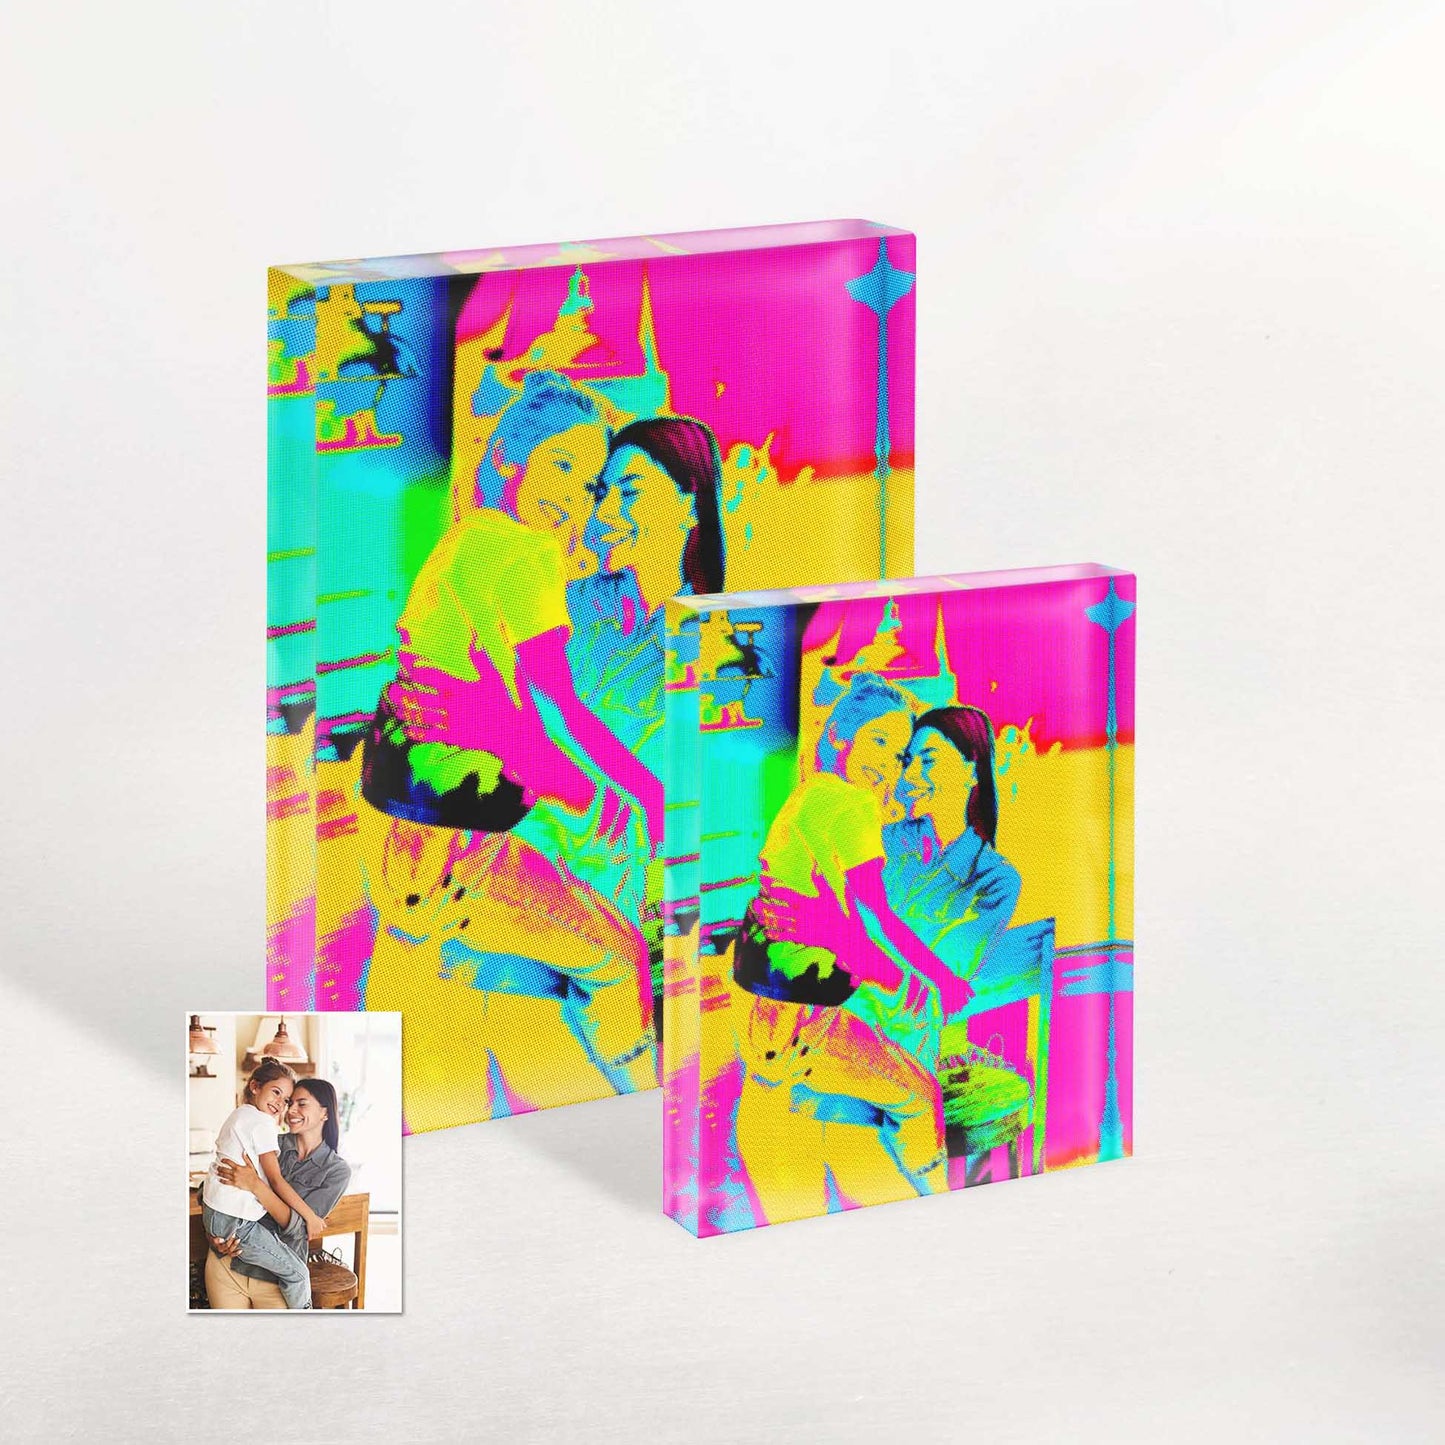 Personalised Pop Art Acrylic Block Photo: A burst of vibrant and unique expression. This colorful and fun piece captures the spirit of pop art, making it an exciting birthday or anniversary gift